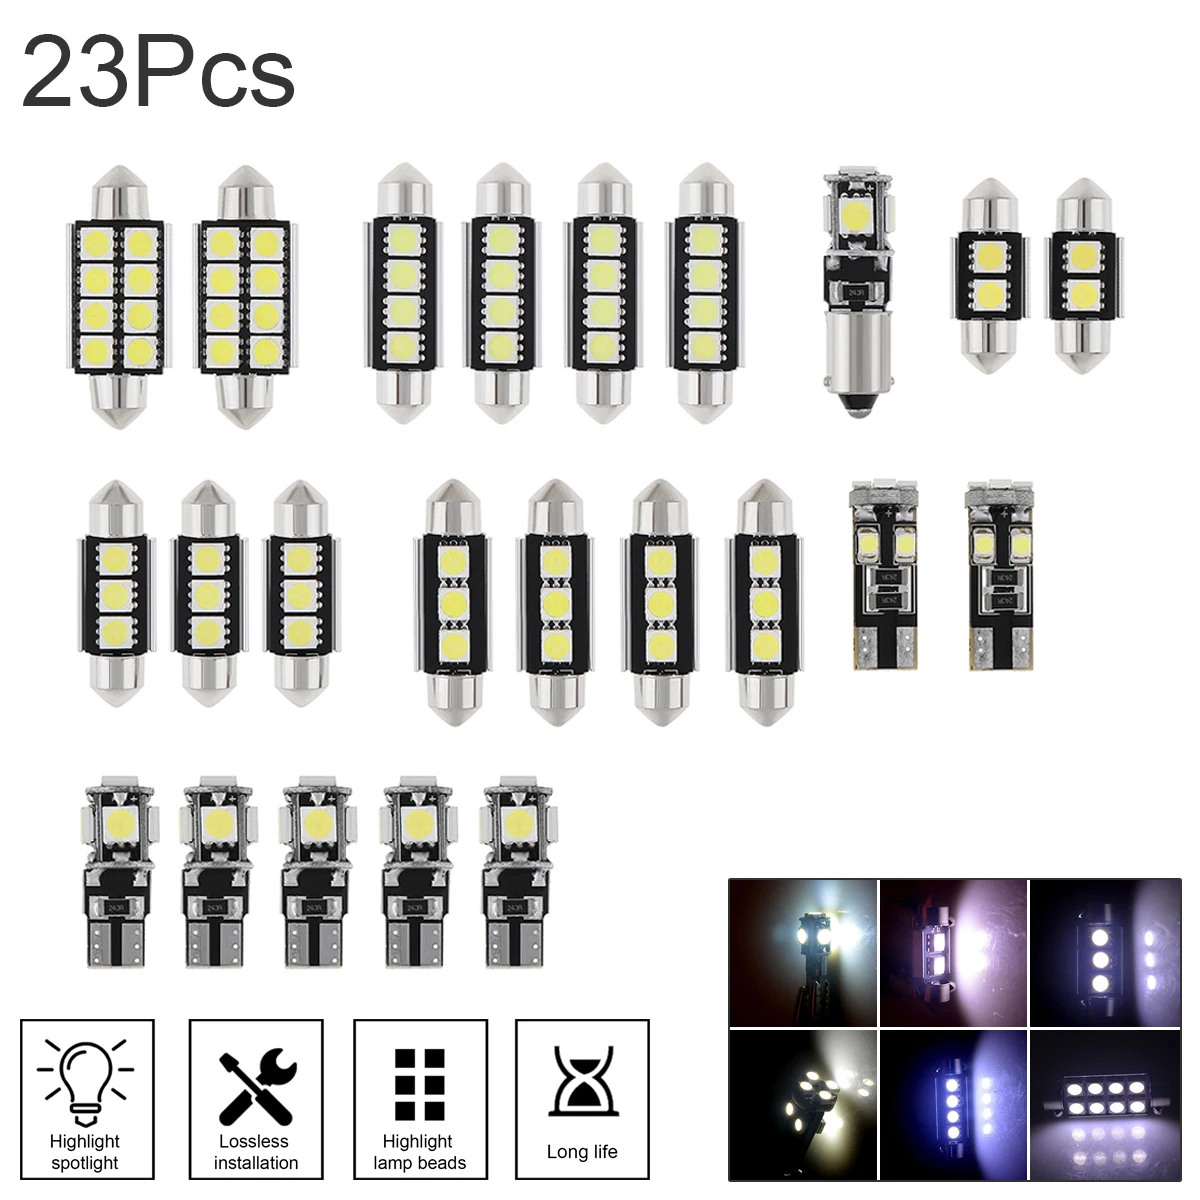 

23pcs T10 5050 W5W 6000K 600Lm White Color Canbus LED Car Interior Inside Light Dome Trunk Map License Plate Lamp Bulbs for Cars